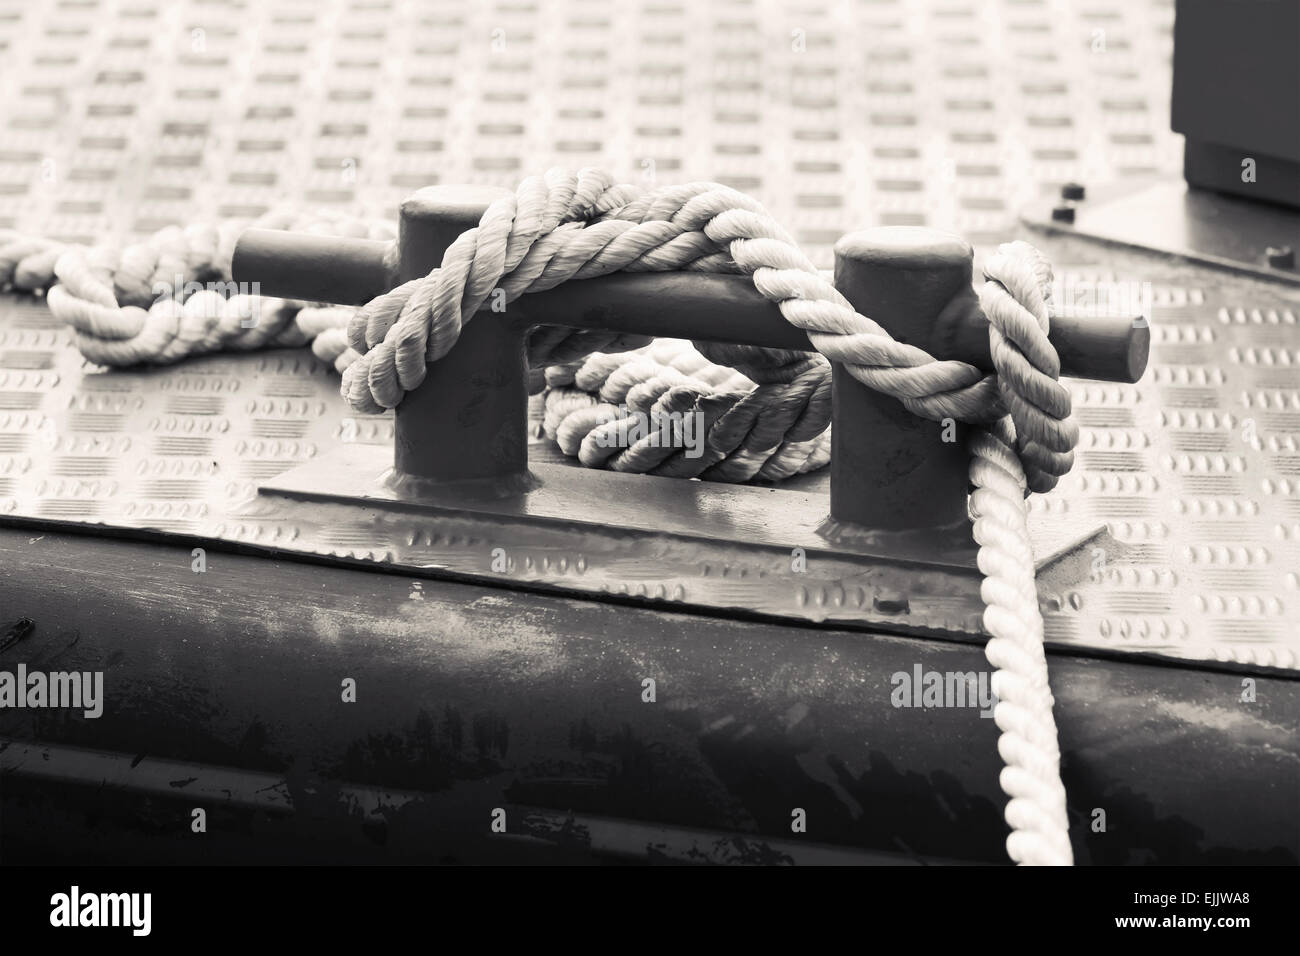 Black steel bollard with ropes mounted on a ship deck, monochrome photo Stock Photo